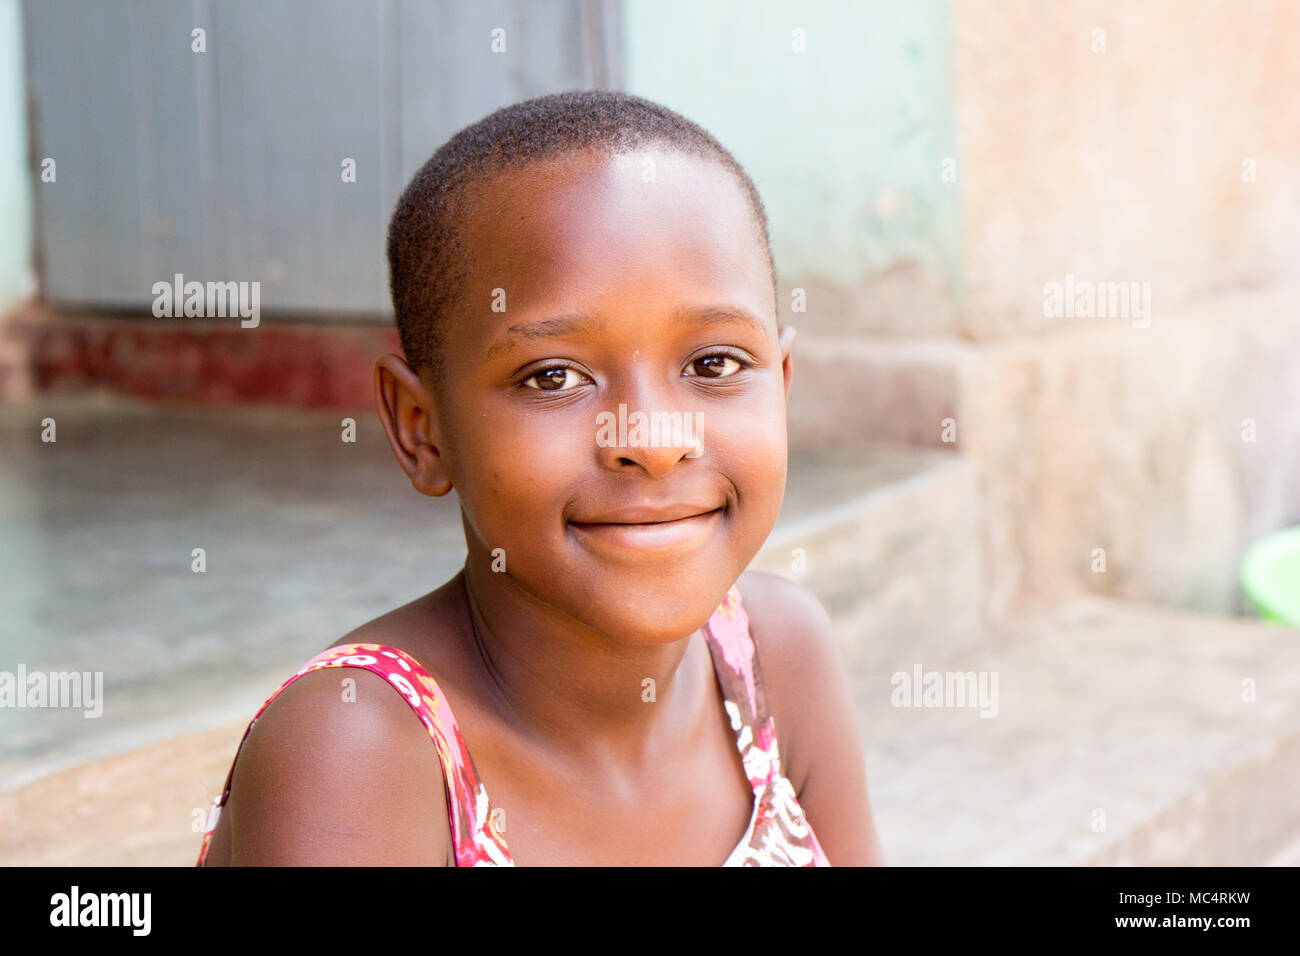 Lugazi, Uganda. 14 May 2017. A portrait of a beautiful Ugandan girl sitting on the stairs in front of a house. Stock Photo